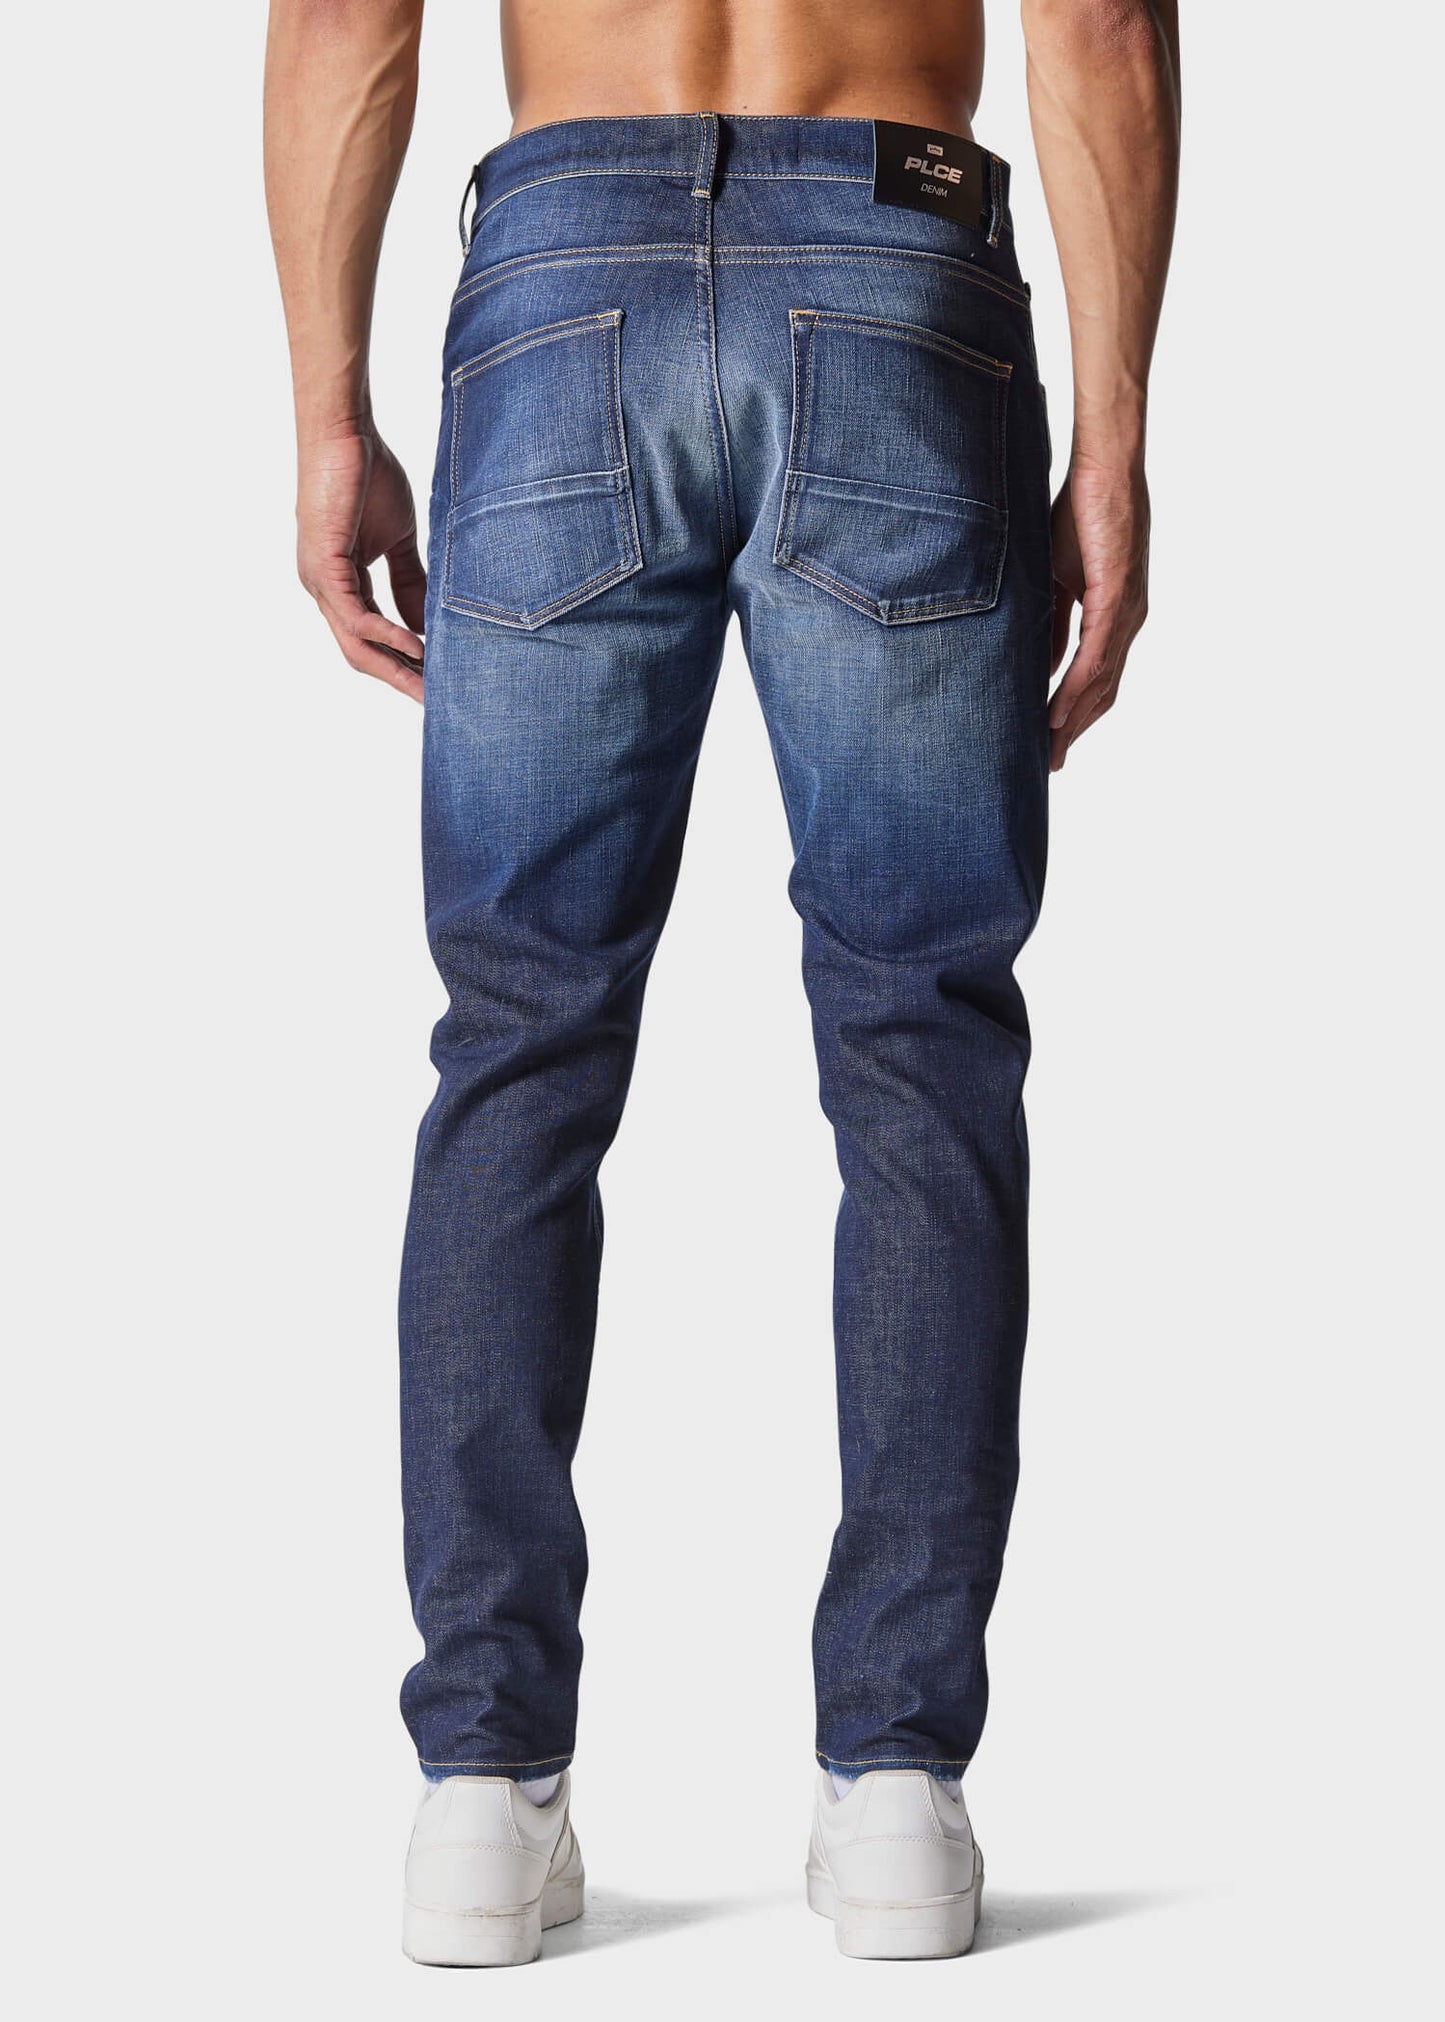 Moriarty COB 921 Slim Fit Jeans